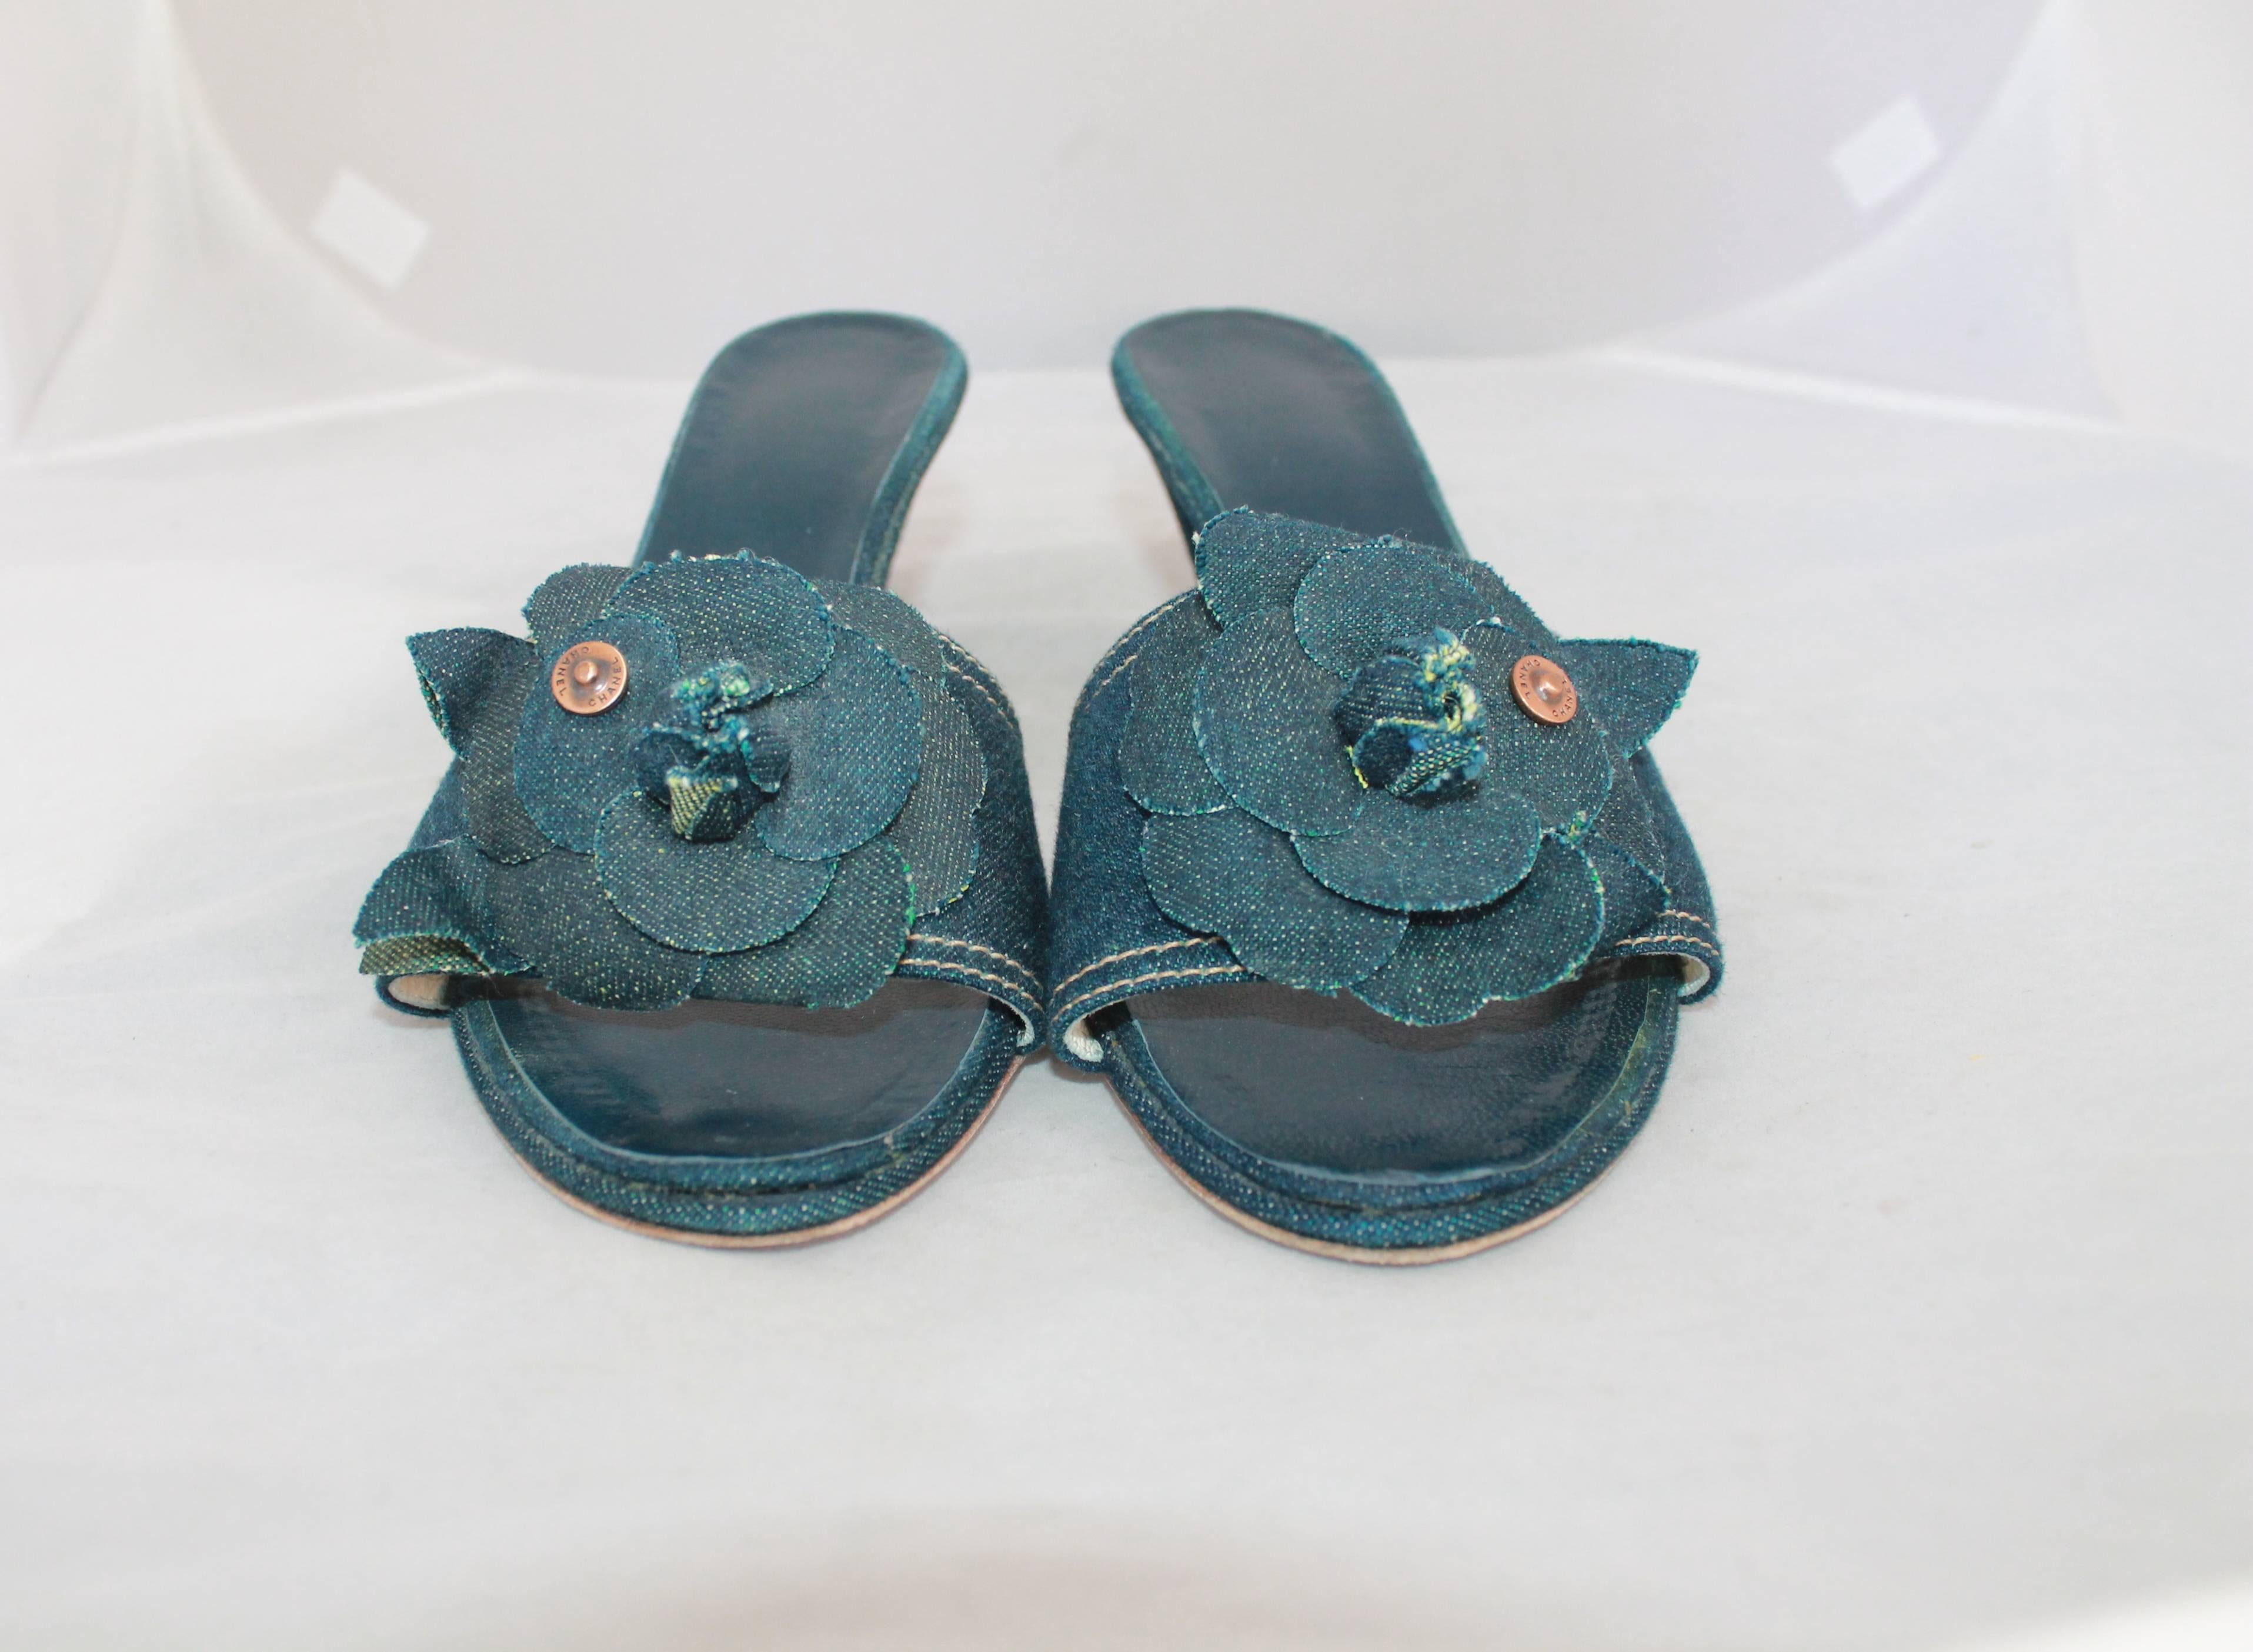 Chanel Blue Denim Slides w/ Camellia & Chanel Rivet - 40.  These slides are in excellent condition with wear to the sole.  They are made of a denim material, as are the Camellias.  They have a copper-looking rivets with 